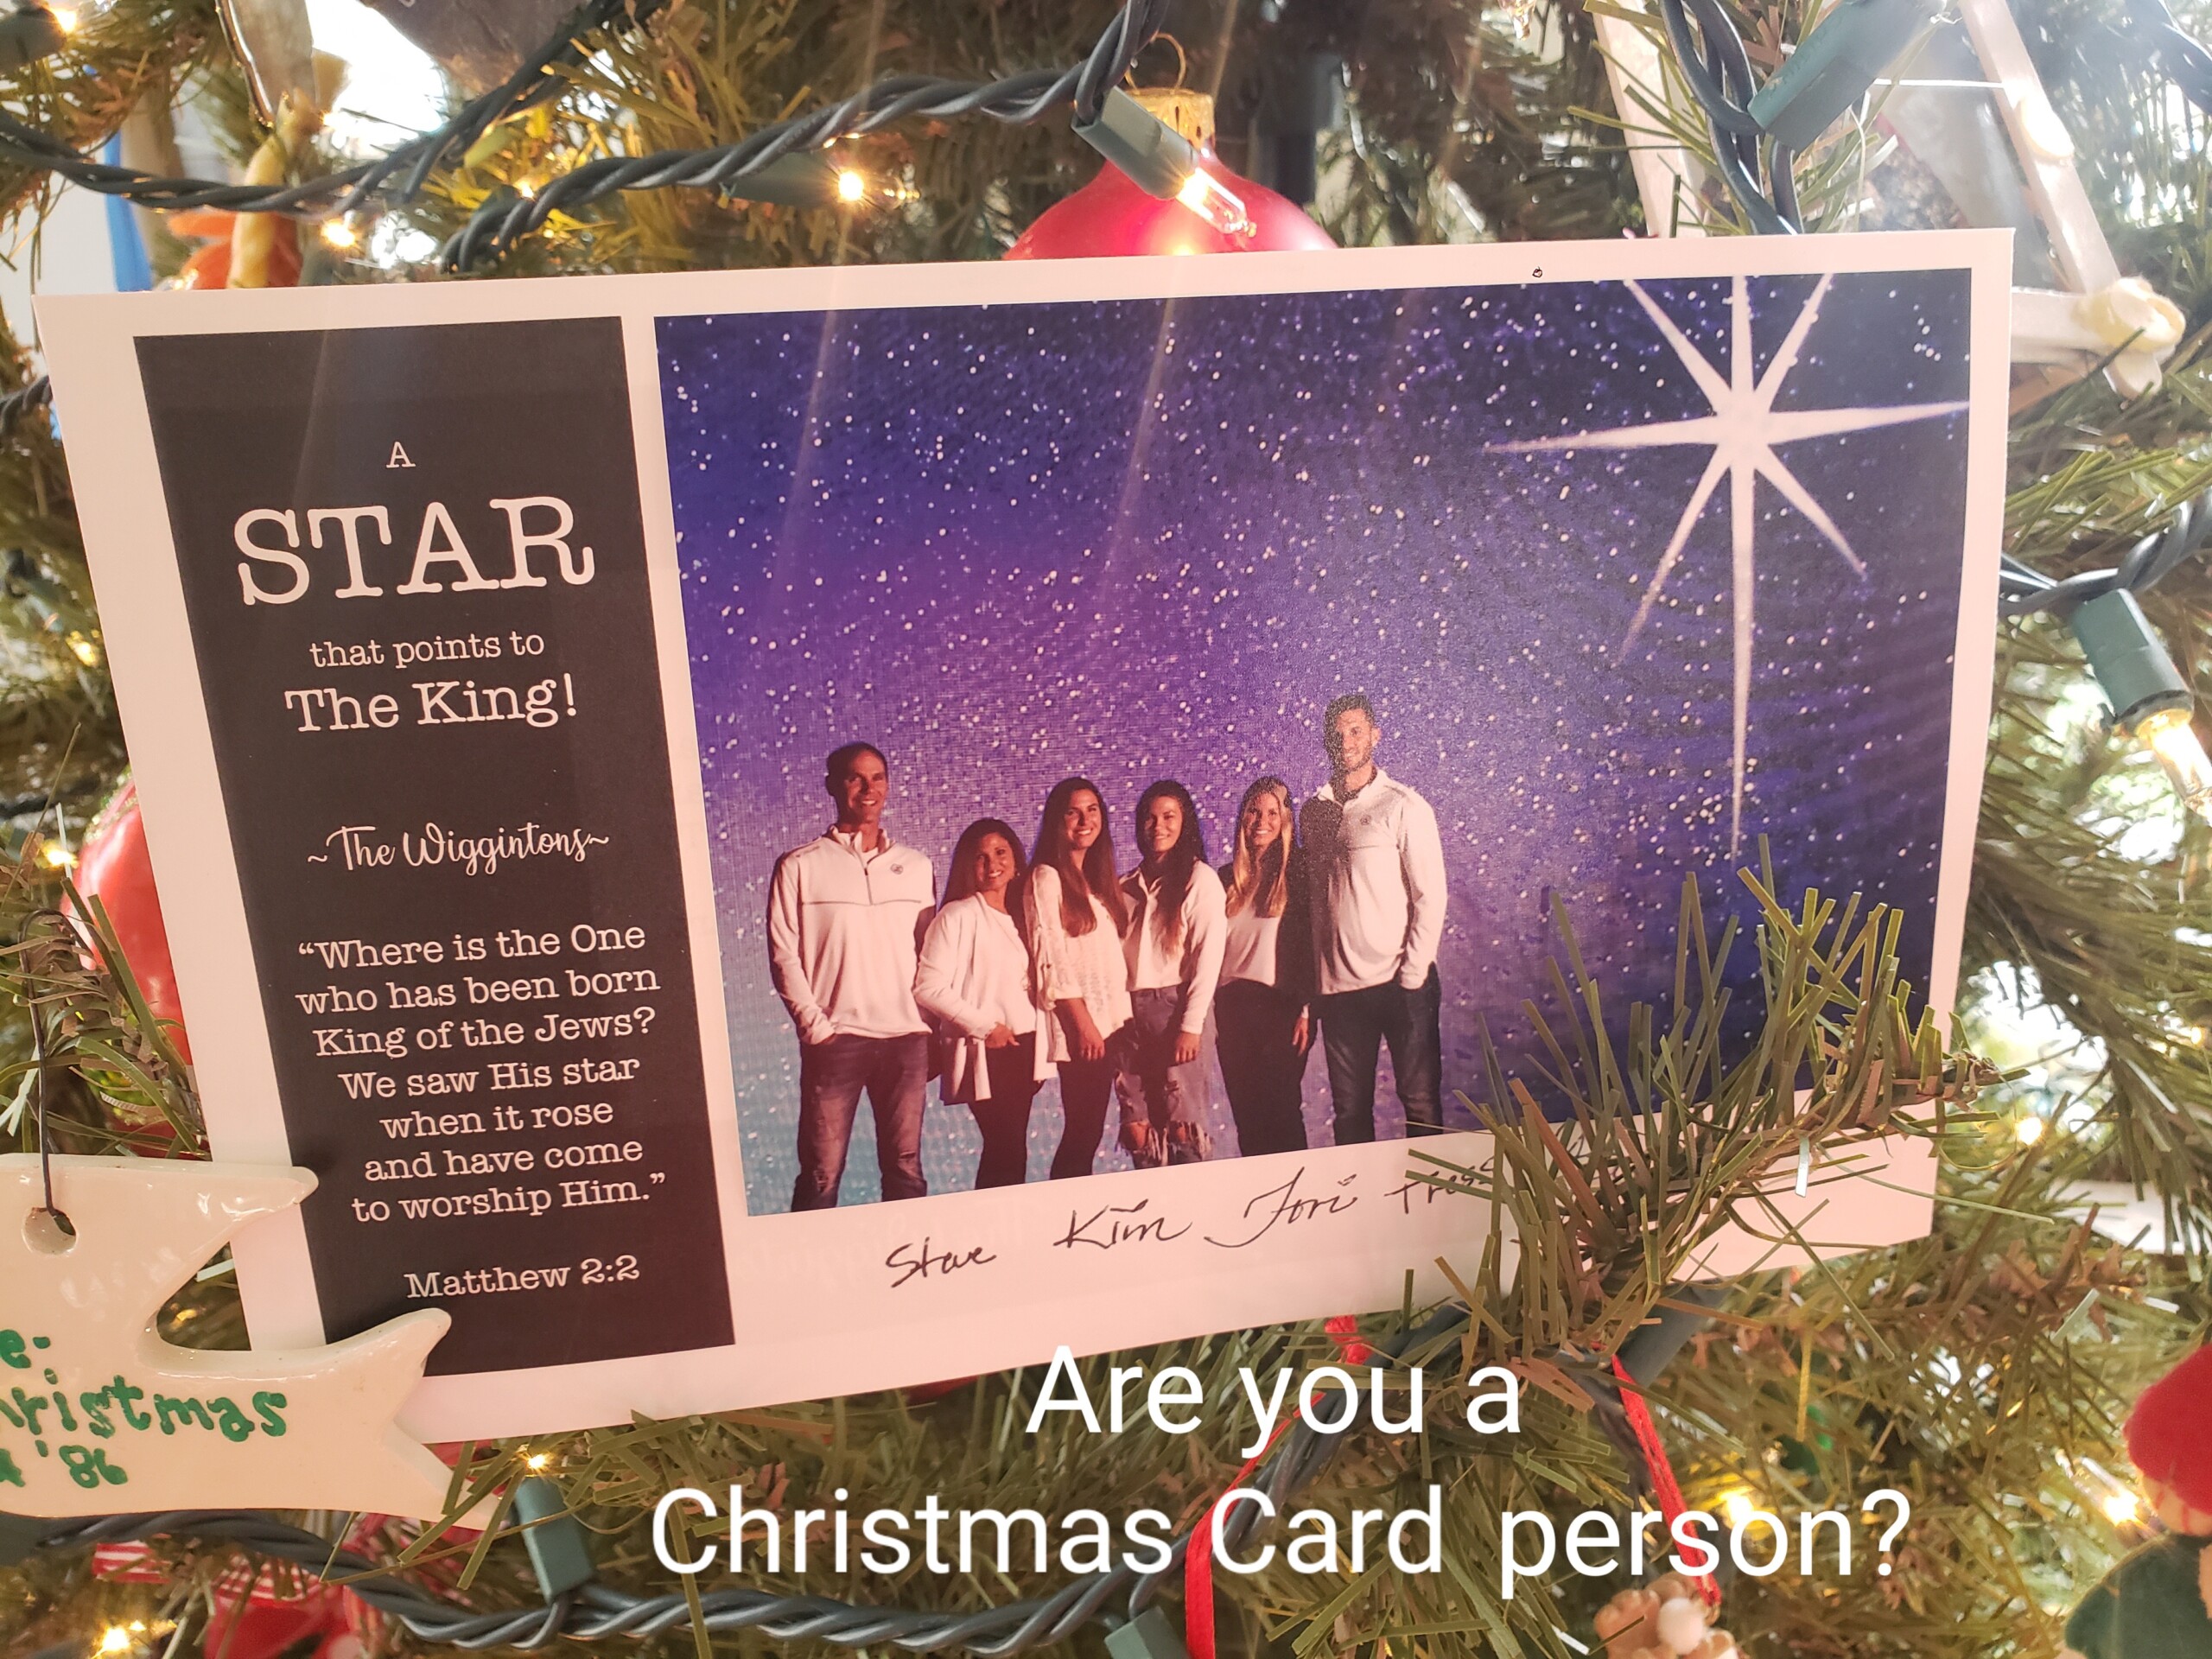 Are you a Christmas Card Person?